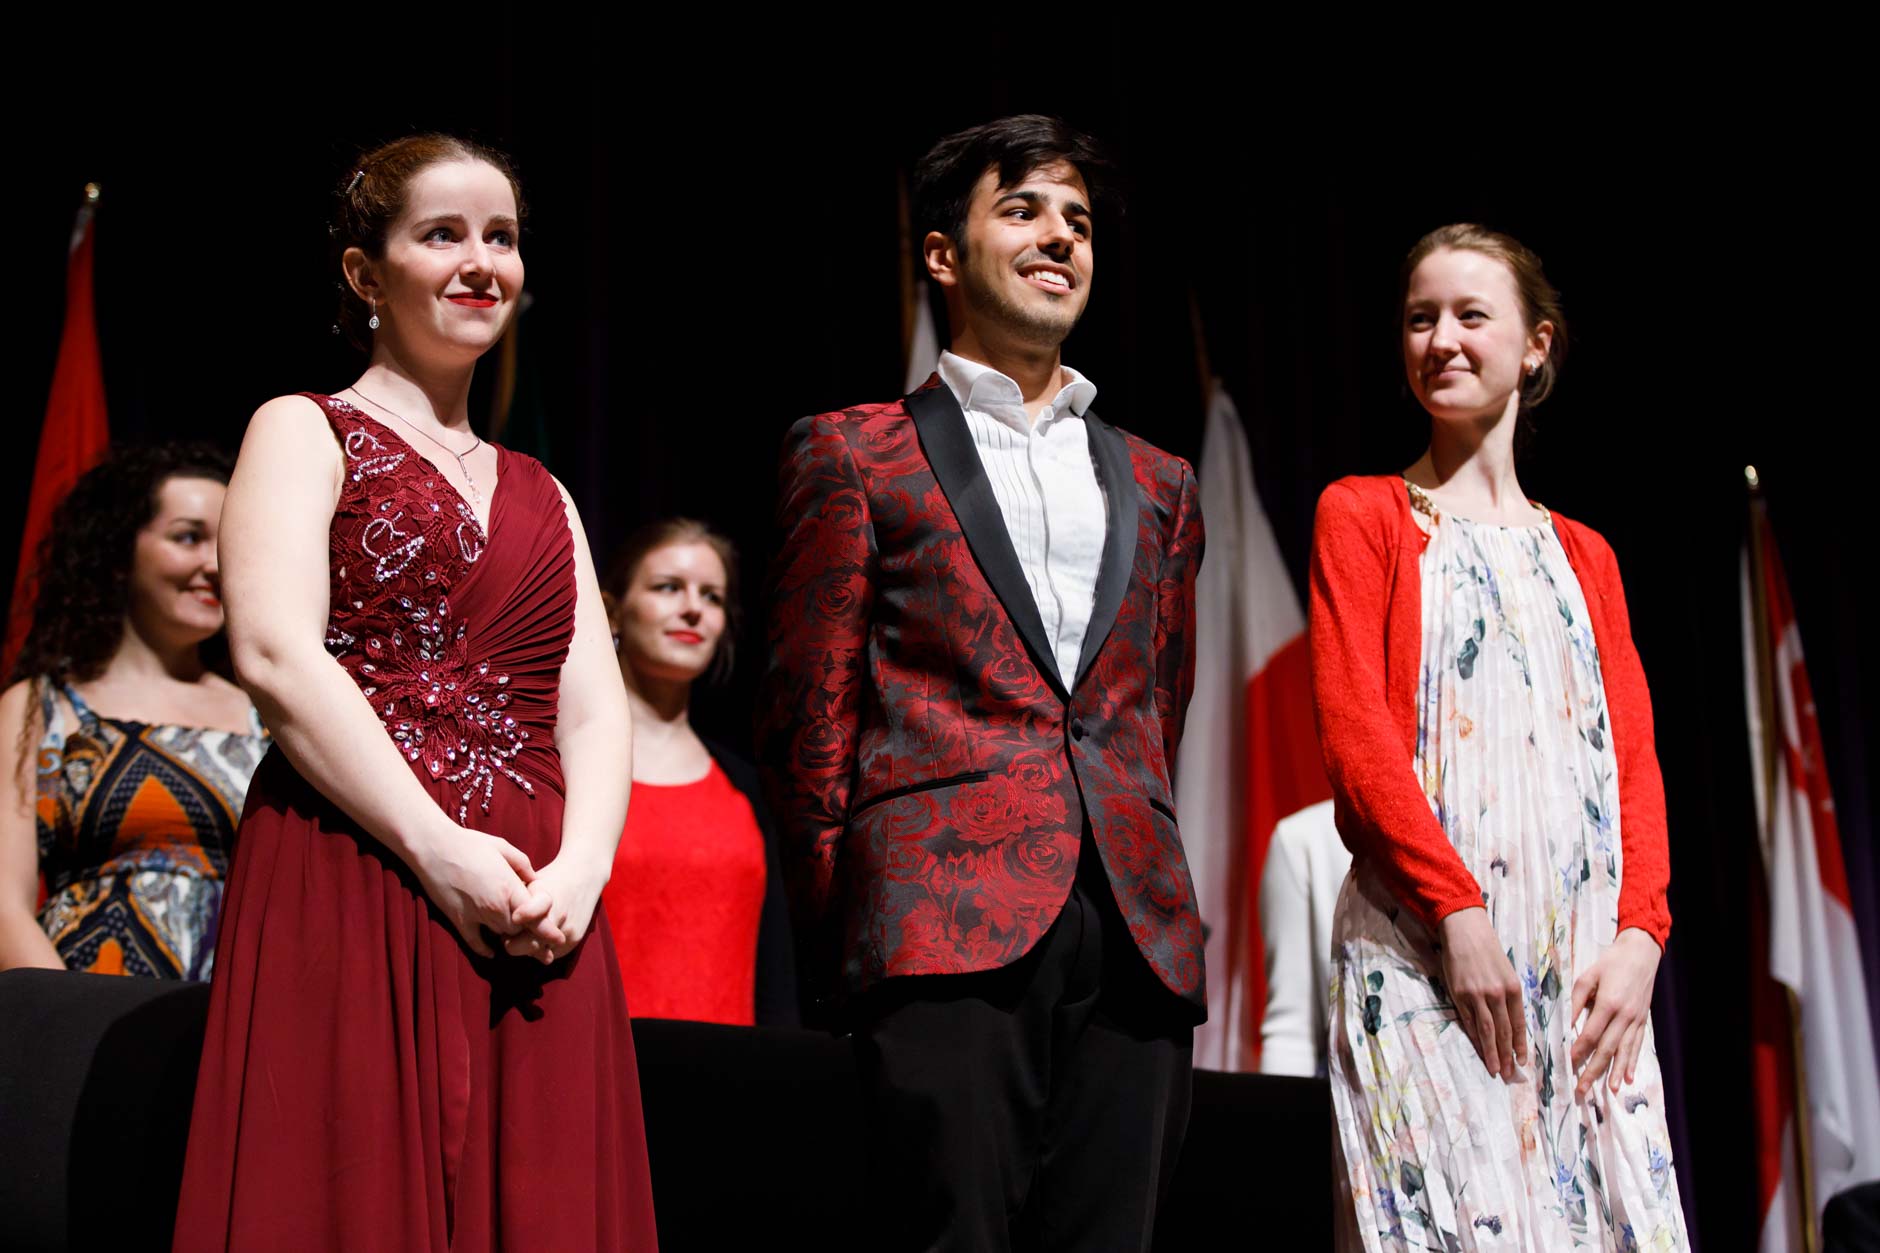 Stage IV finalists Melanie Laurent from France, left, Valerio Lisci from Italy and Mathilde Wauters from Belgium stand for recognition at the awards ceremony of the 11th USA International Harp Competition at Indiana University in Bloomington, Indiana on Saturday, July 13, 2019. (Photo by James Brosher)